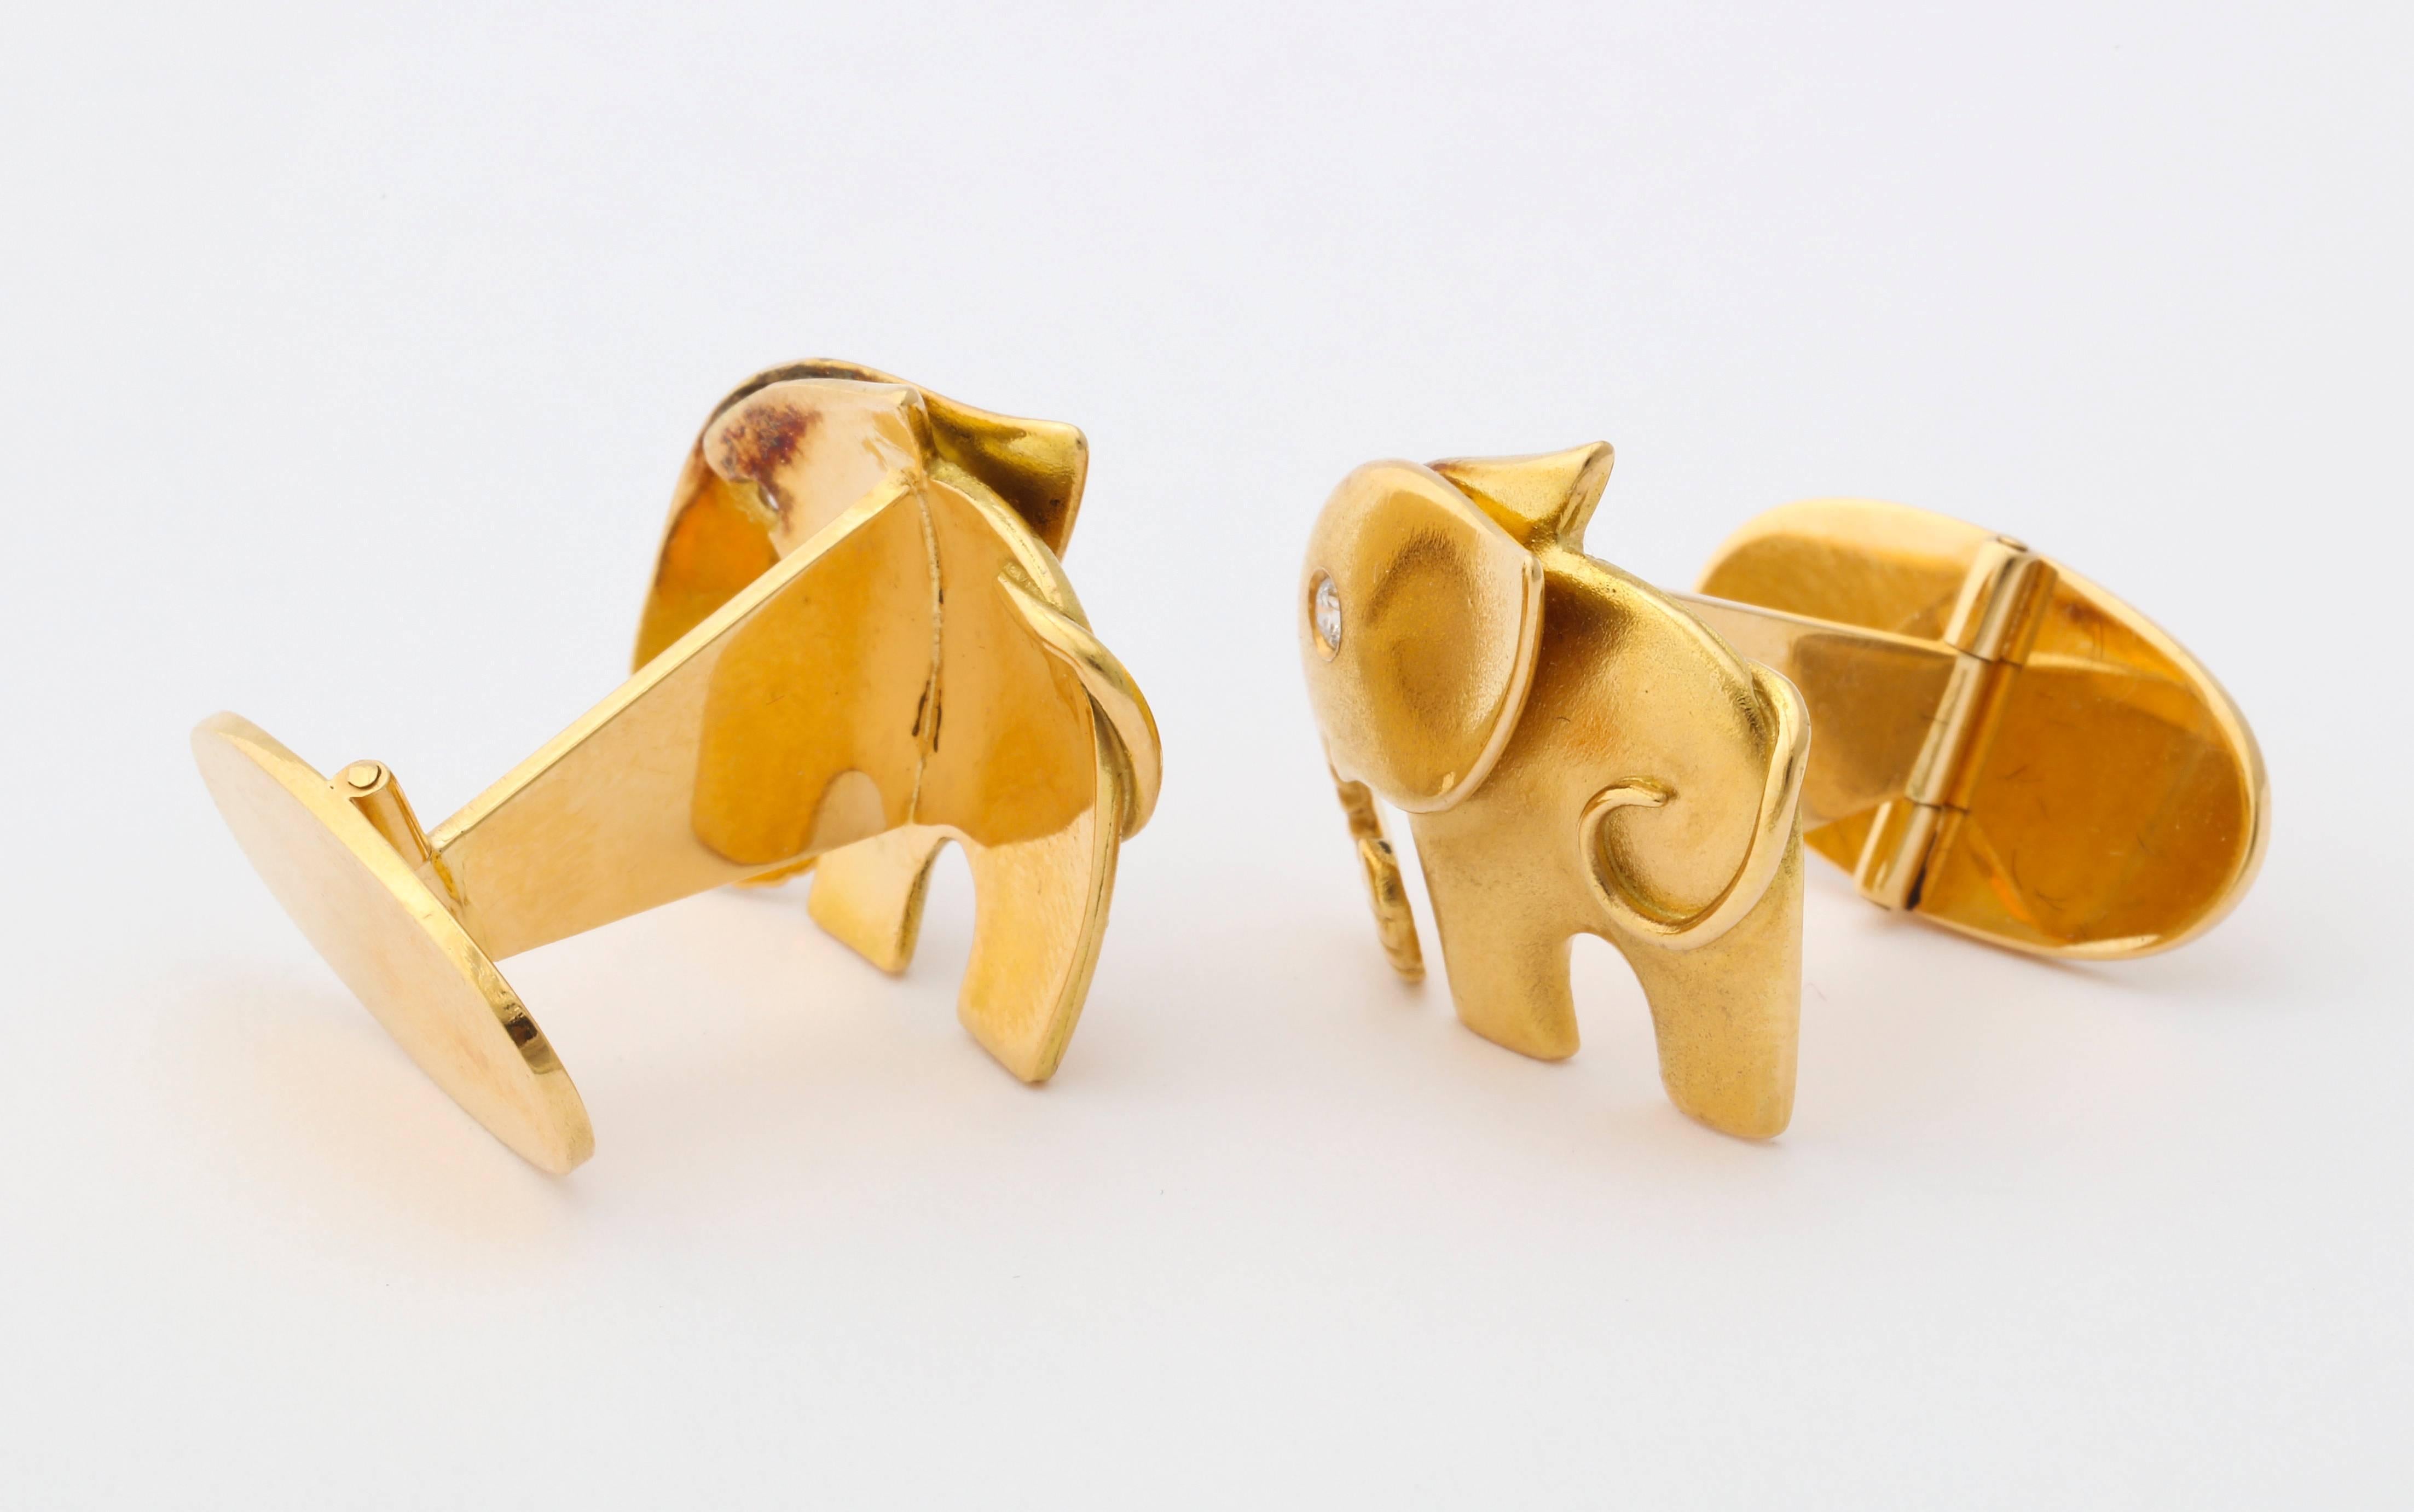 Charming and whimsical elephant cufflinks crafted in 18K gold, the eyes set with diamonds. Marked 750, with registry numbers and a signature mark of an 